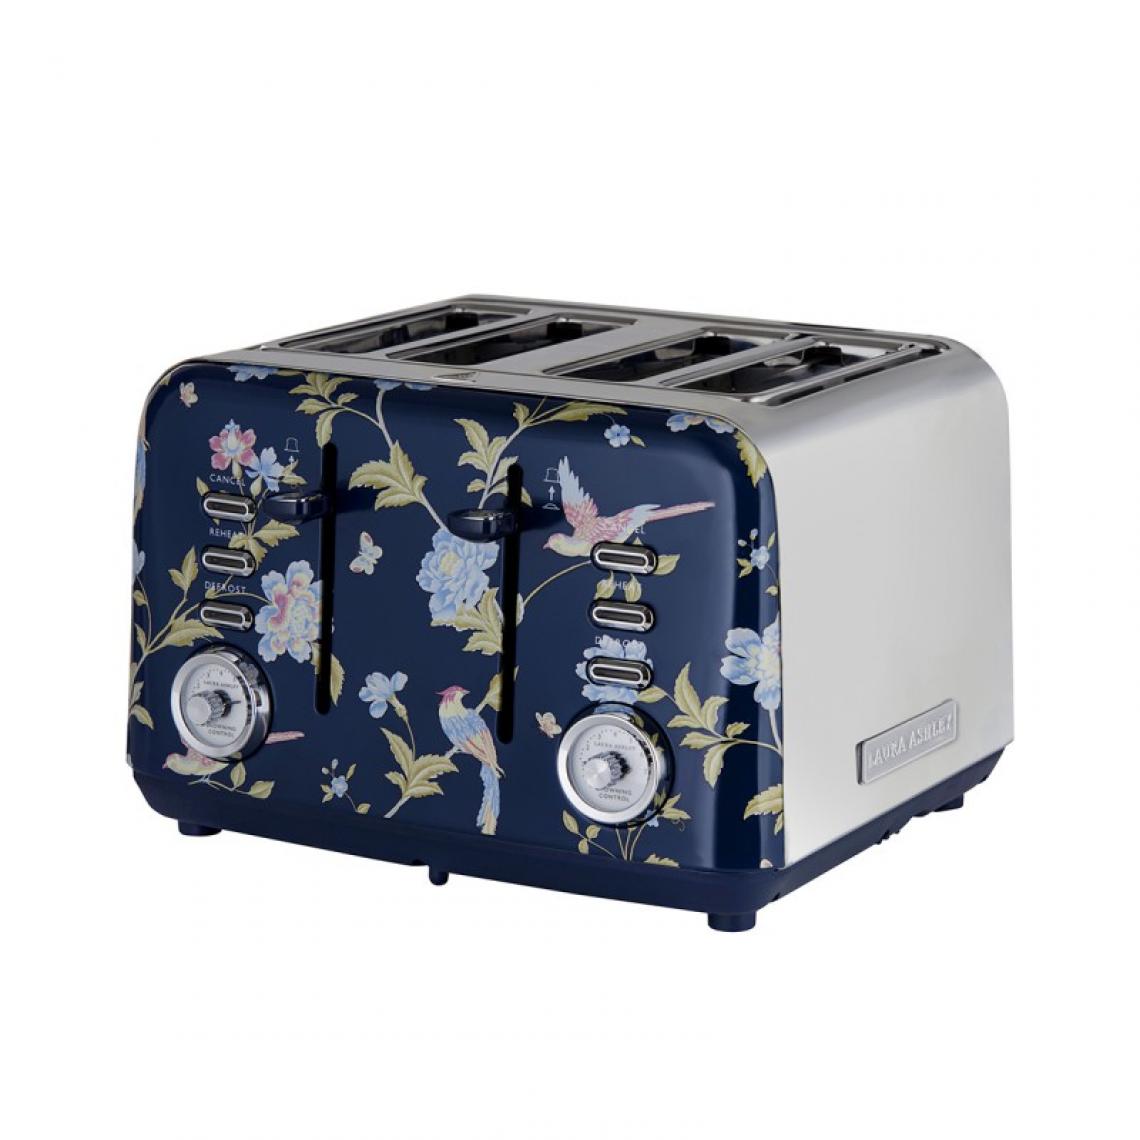 Vq - VQ LAURA ASHLEY - TOASTER - Grille-pain